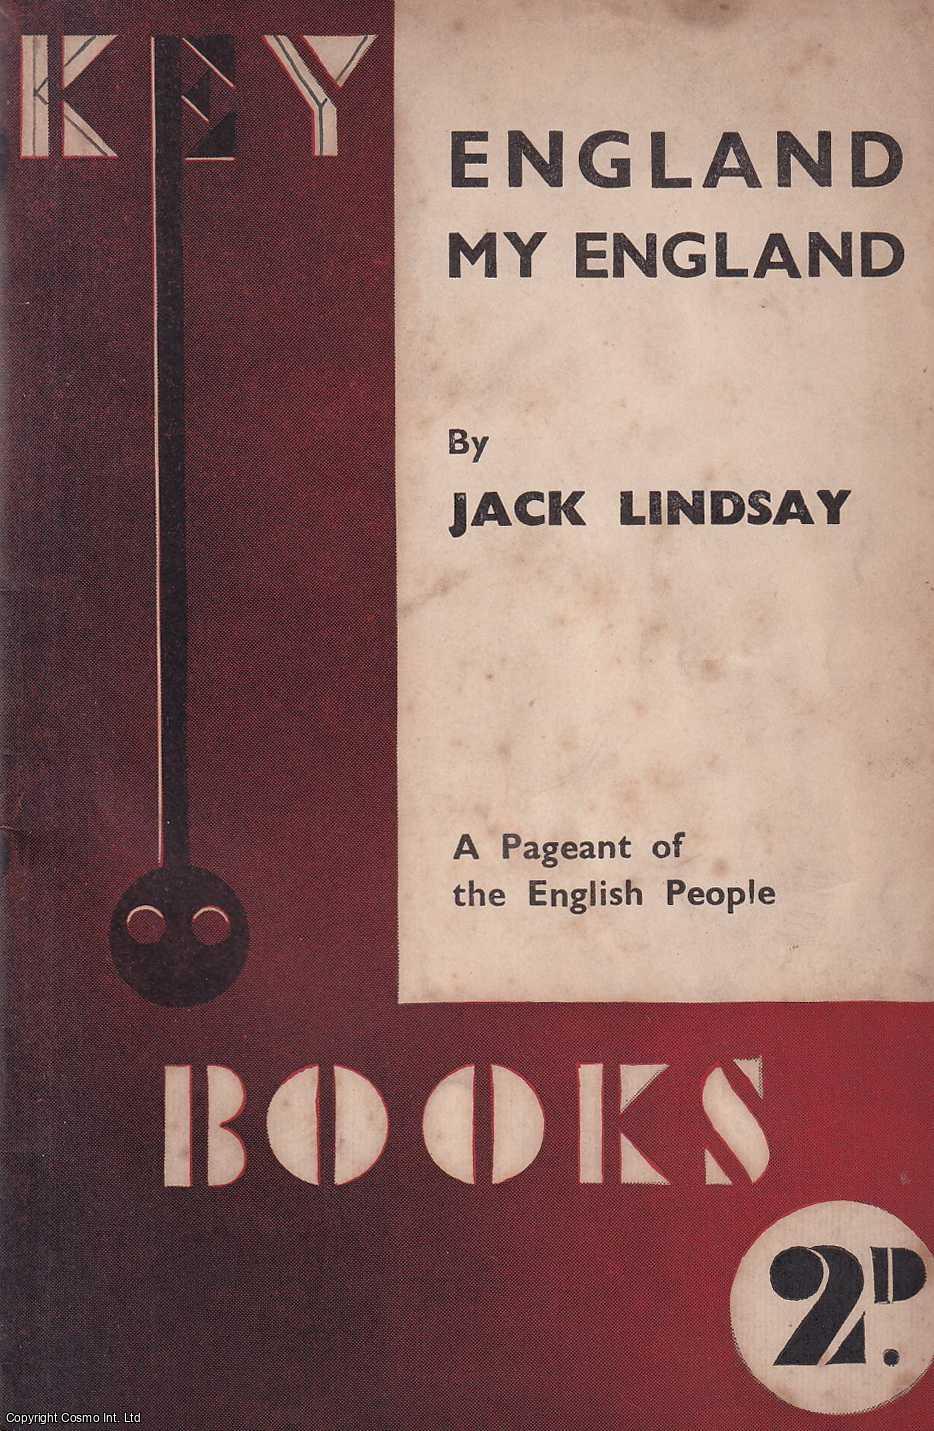 Jack Lindsay - England My England.... A Pageant of the English People. Key Books No. 2. Published by Fore Publications 1939.